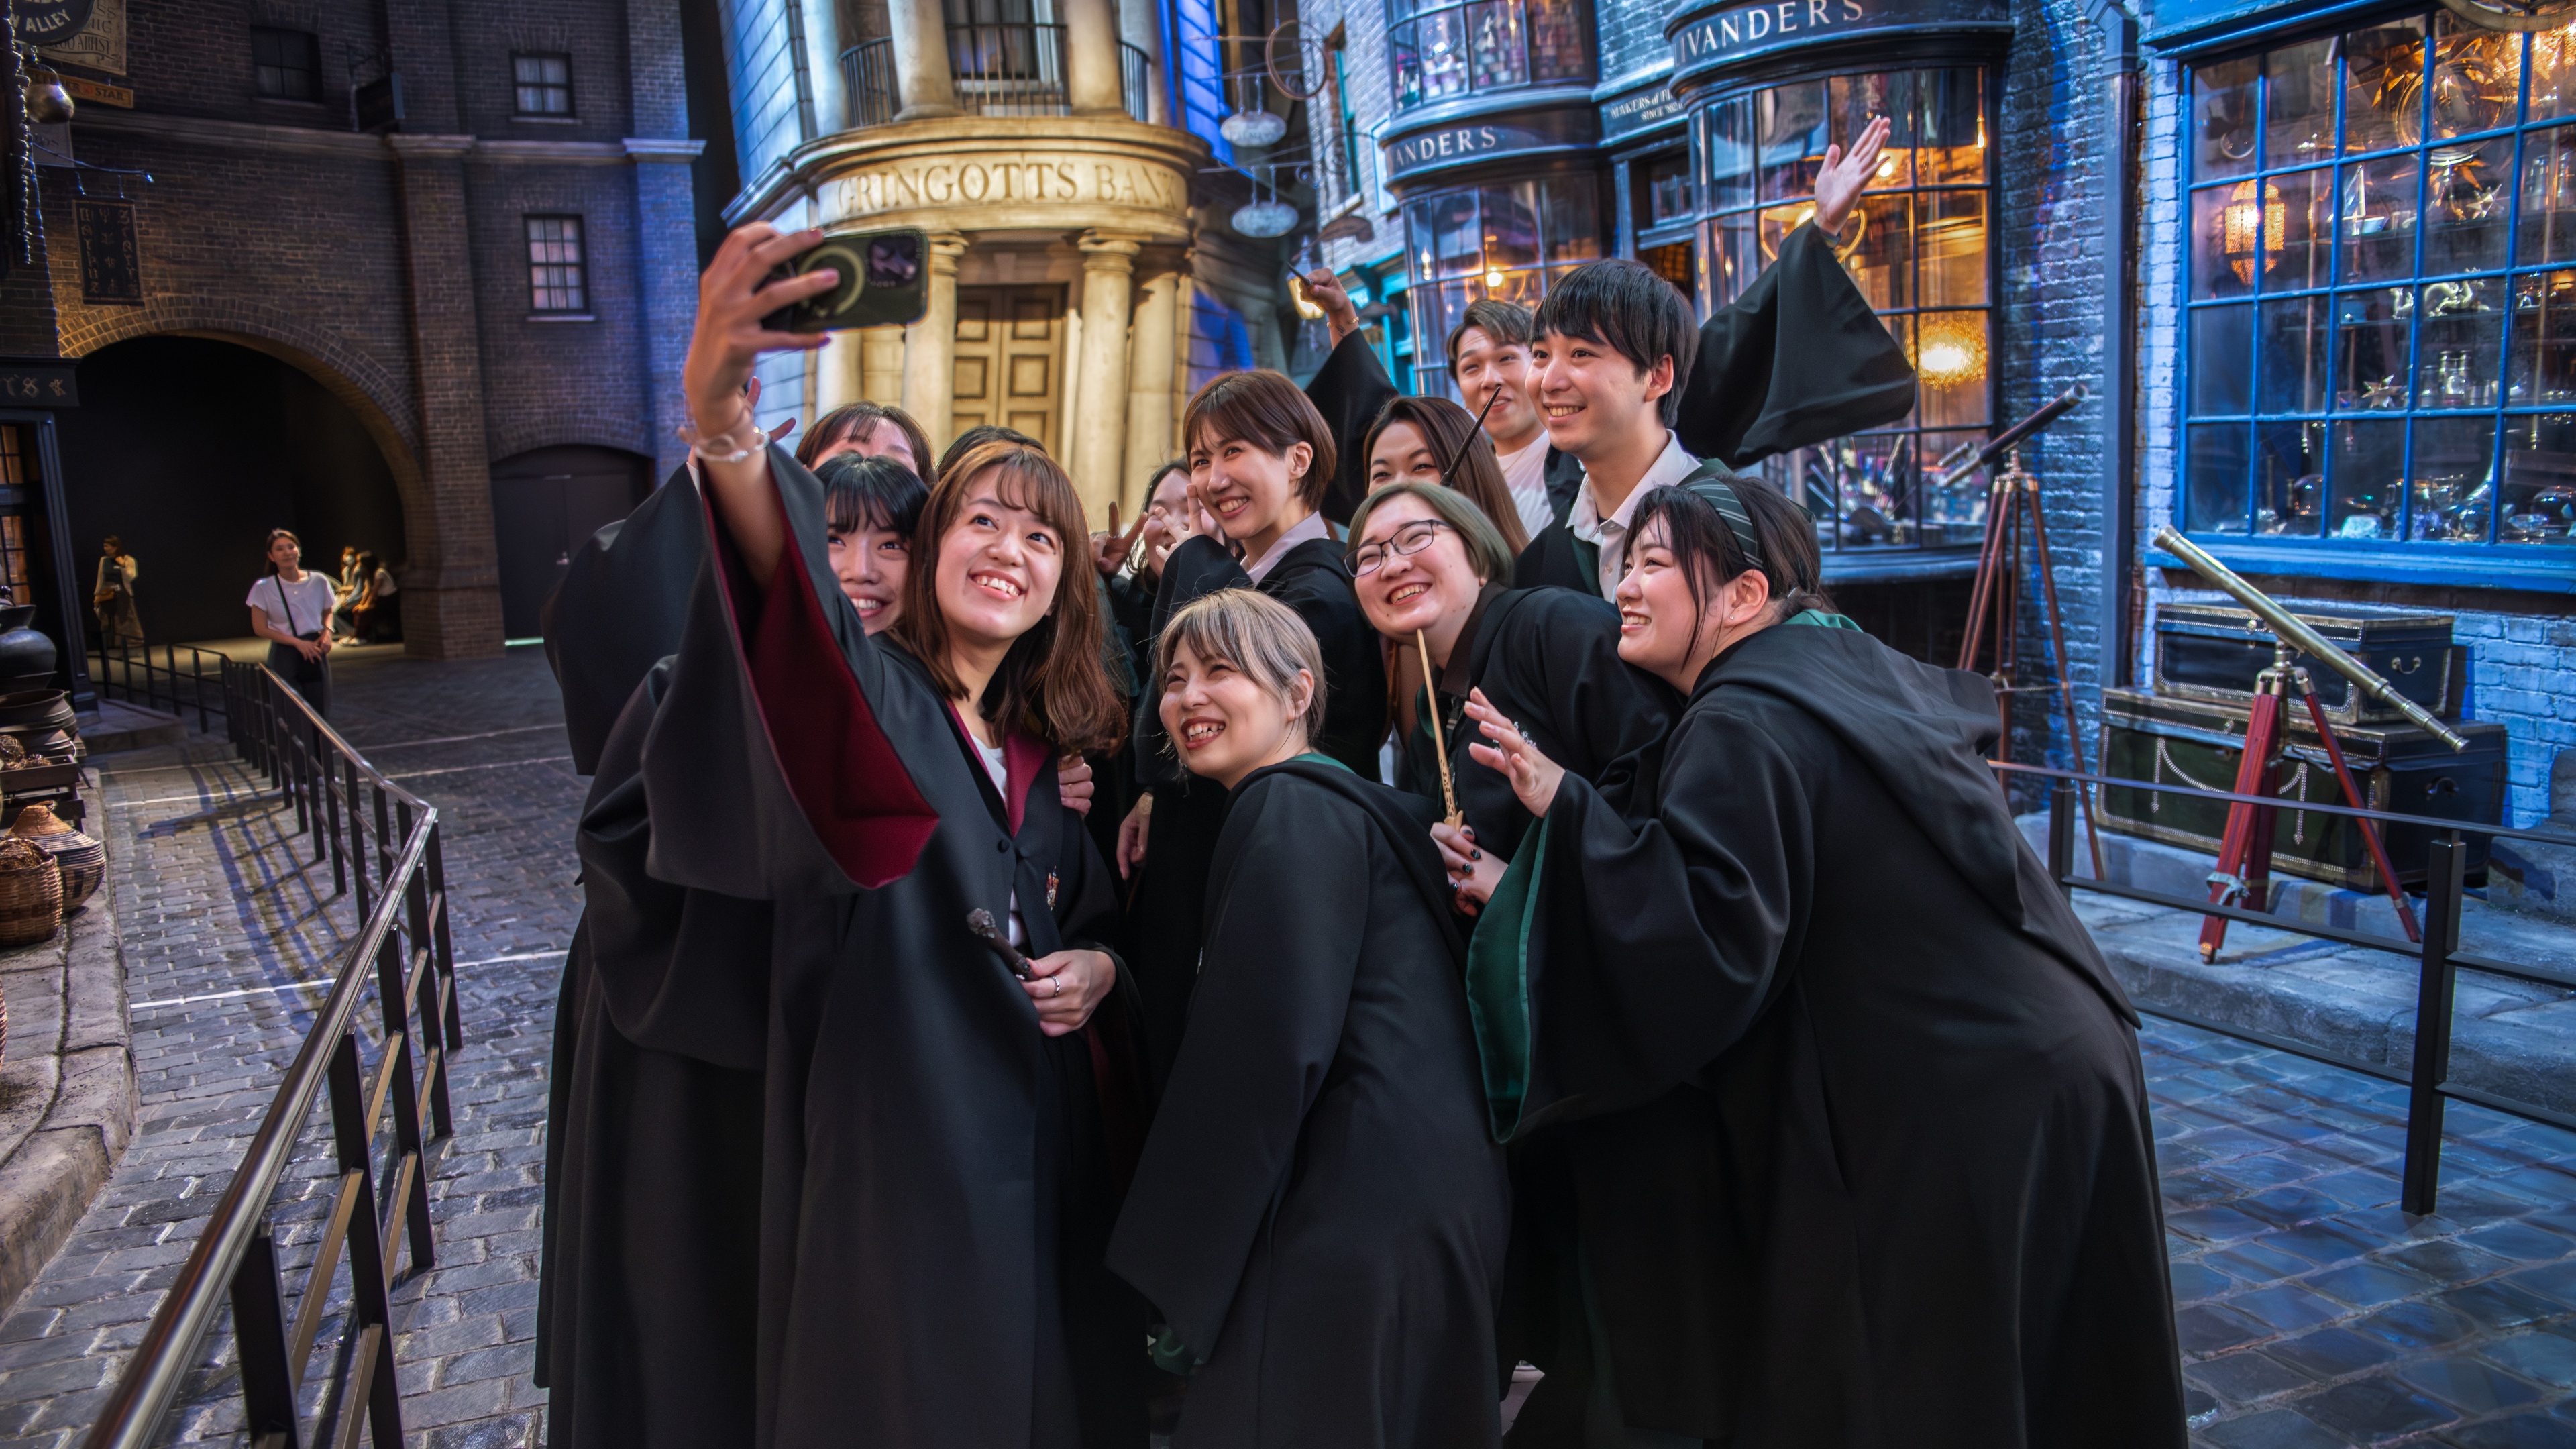 People gathering to take a selfie on Diagon Alley in Harry Potter costumes smiling